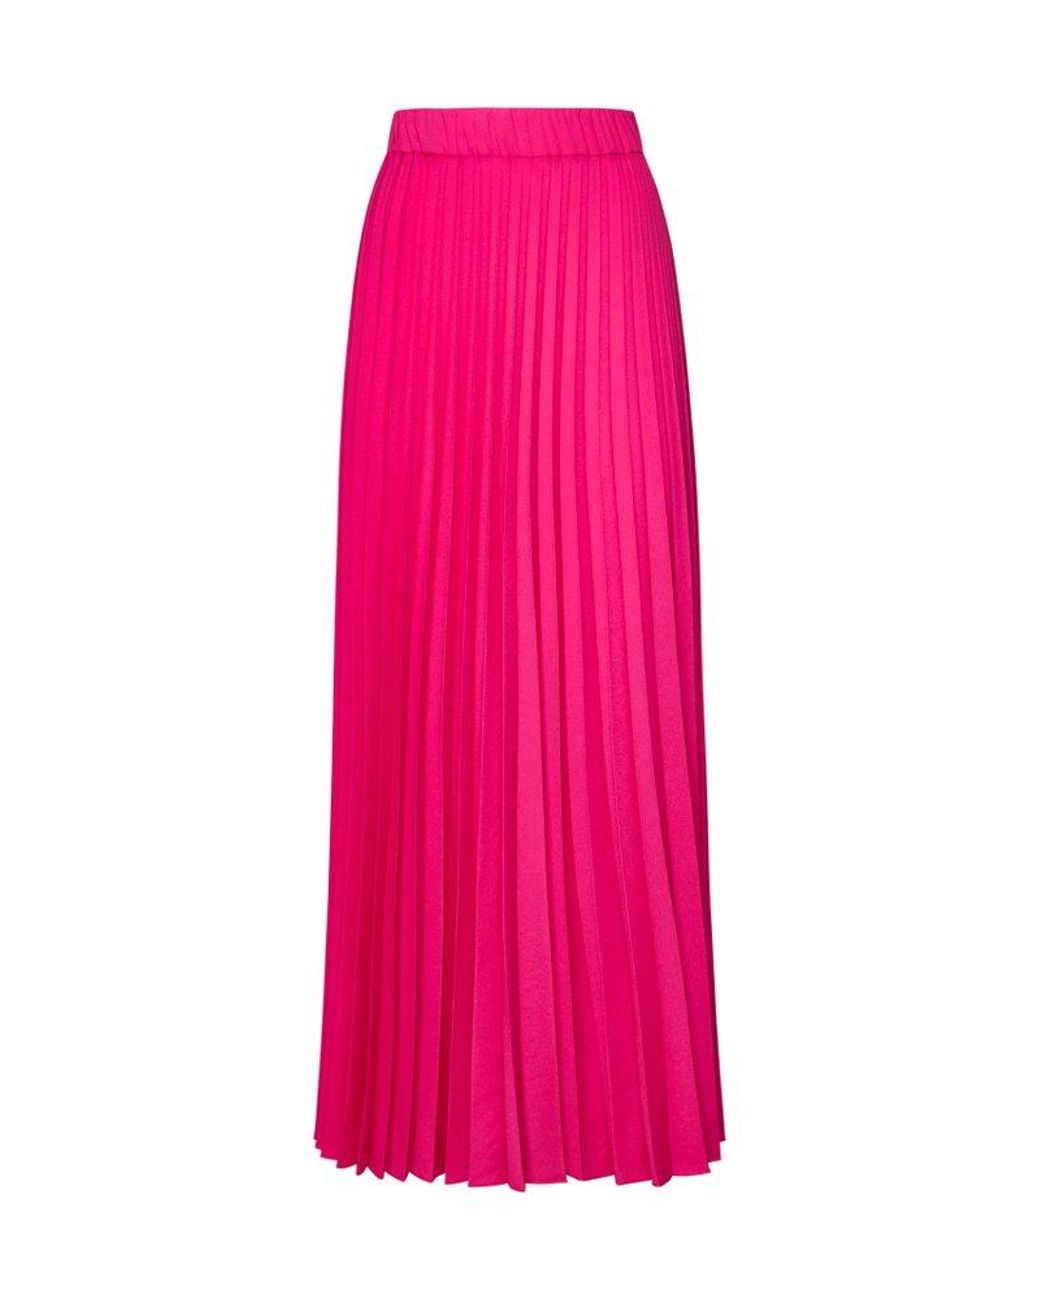 P.A.R.O.S.H. Full Pleated Maxi Skirt in Pink | Lyst